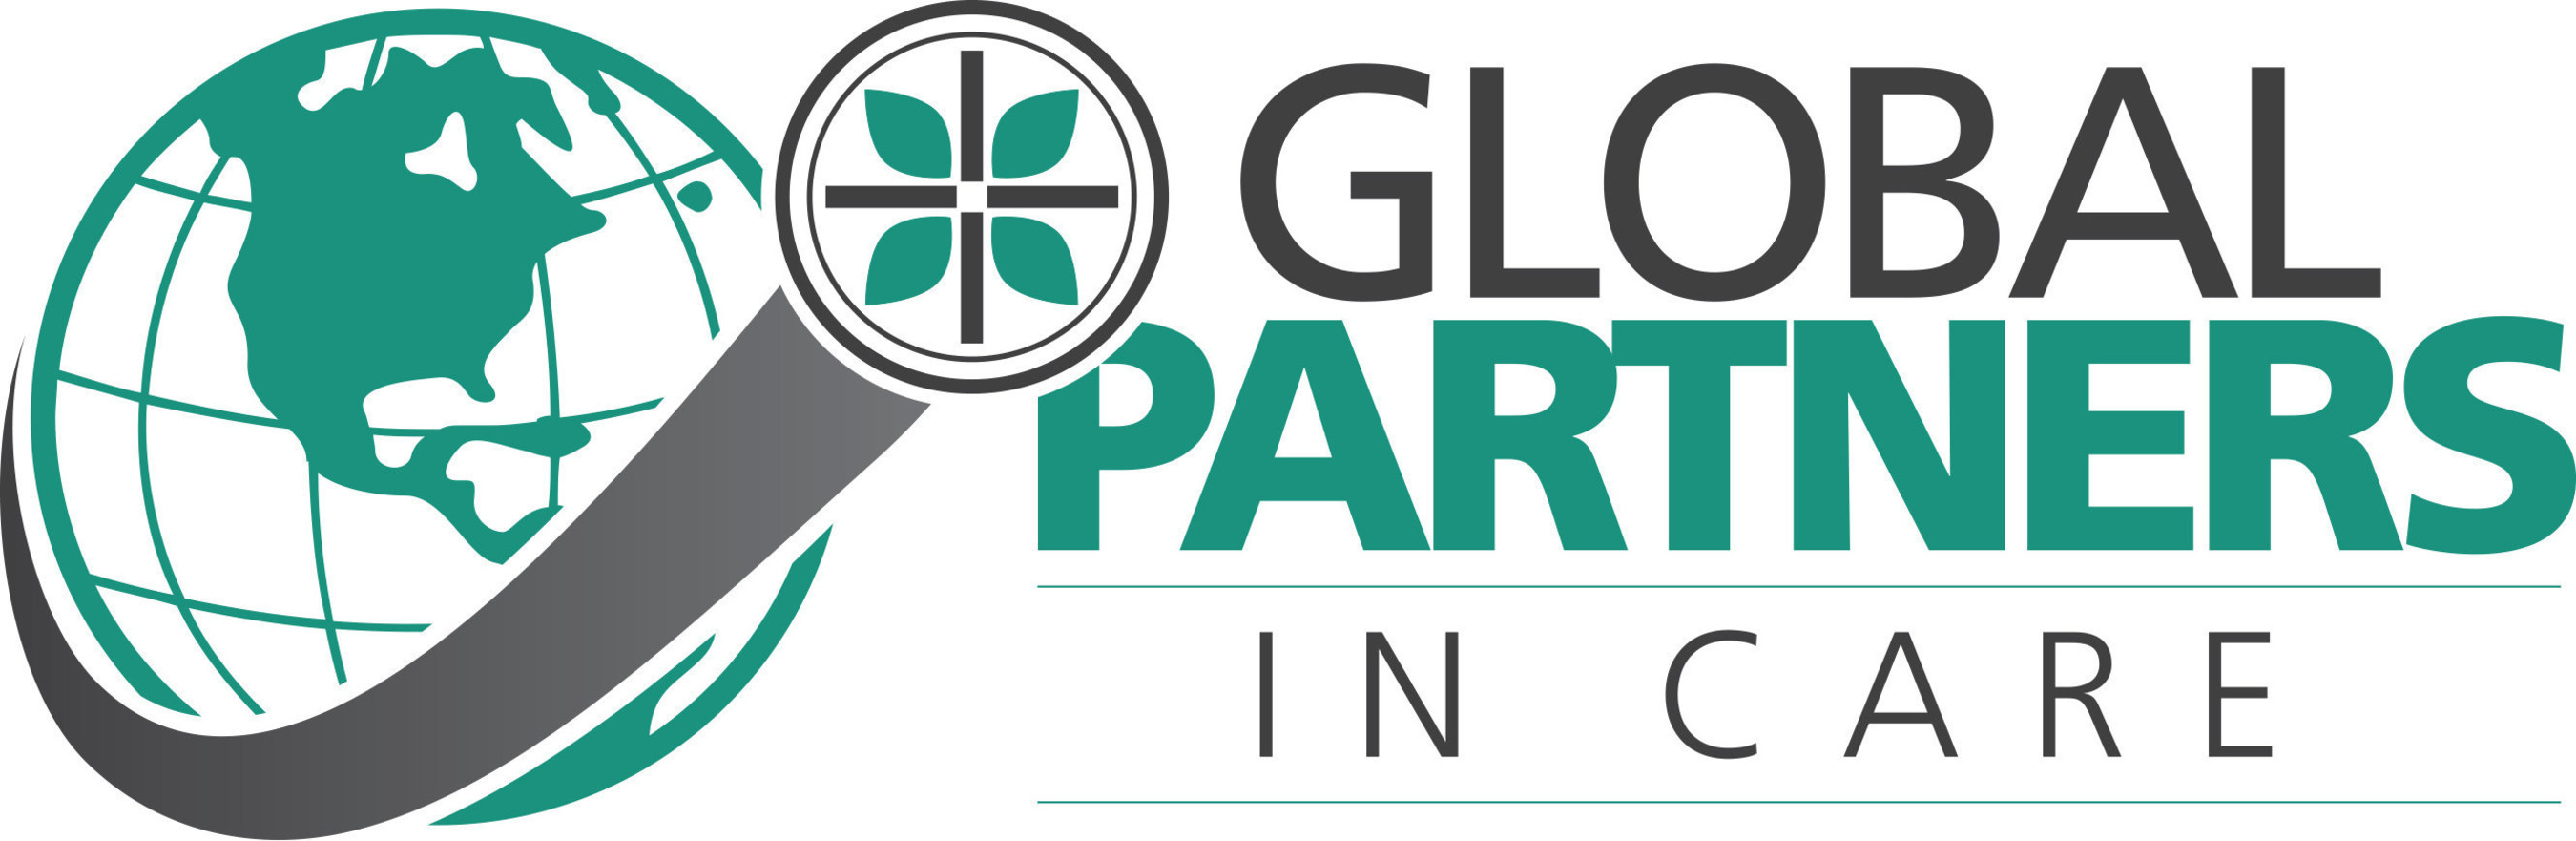 Global Partners in Care's mission is building partnerships to enhance compassionate care globally and its vision is a world where individuals and families facing serious illness, death, and grief will experience the best that humankind can offer.